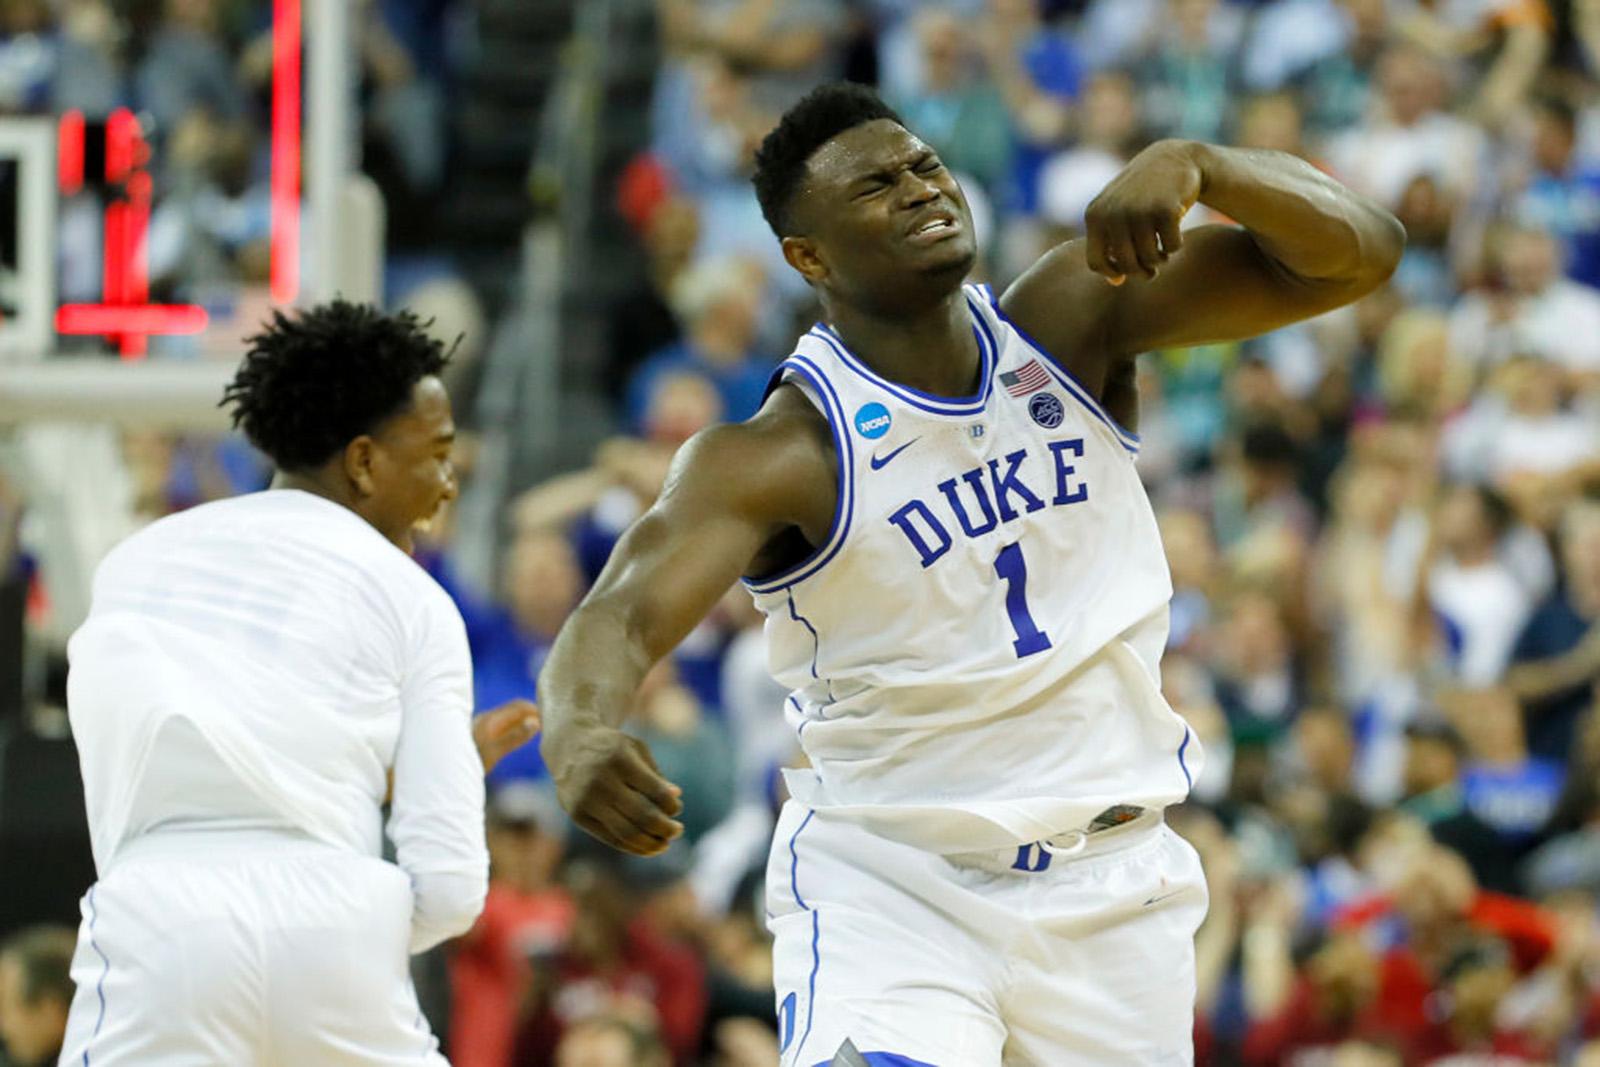 COLUMBIA, SOUTH CAROLINA - MARCH 24: Zion Williamson #1 of the Duke Blue Devils celebrates with his teammates after defeating the UCF Knights in the second round game of the 2019 NCAA Mens Basketball Tournament at Colonial Life Arena on March 24, 2019 in Columbia, South Carolina. (Kevin C.  Cox/Getty Images/TNS) *FOR USE WITH THIS STORY ONLY*